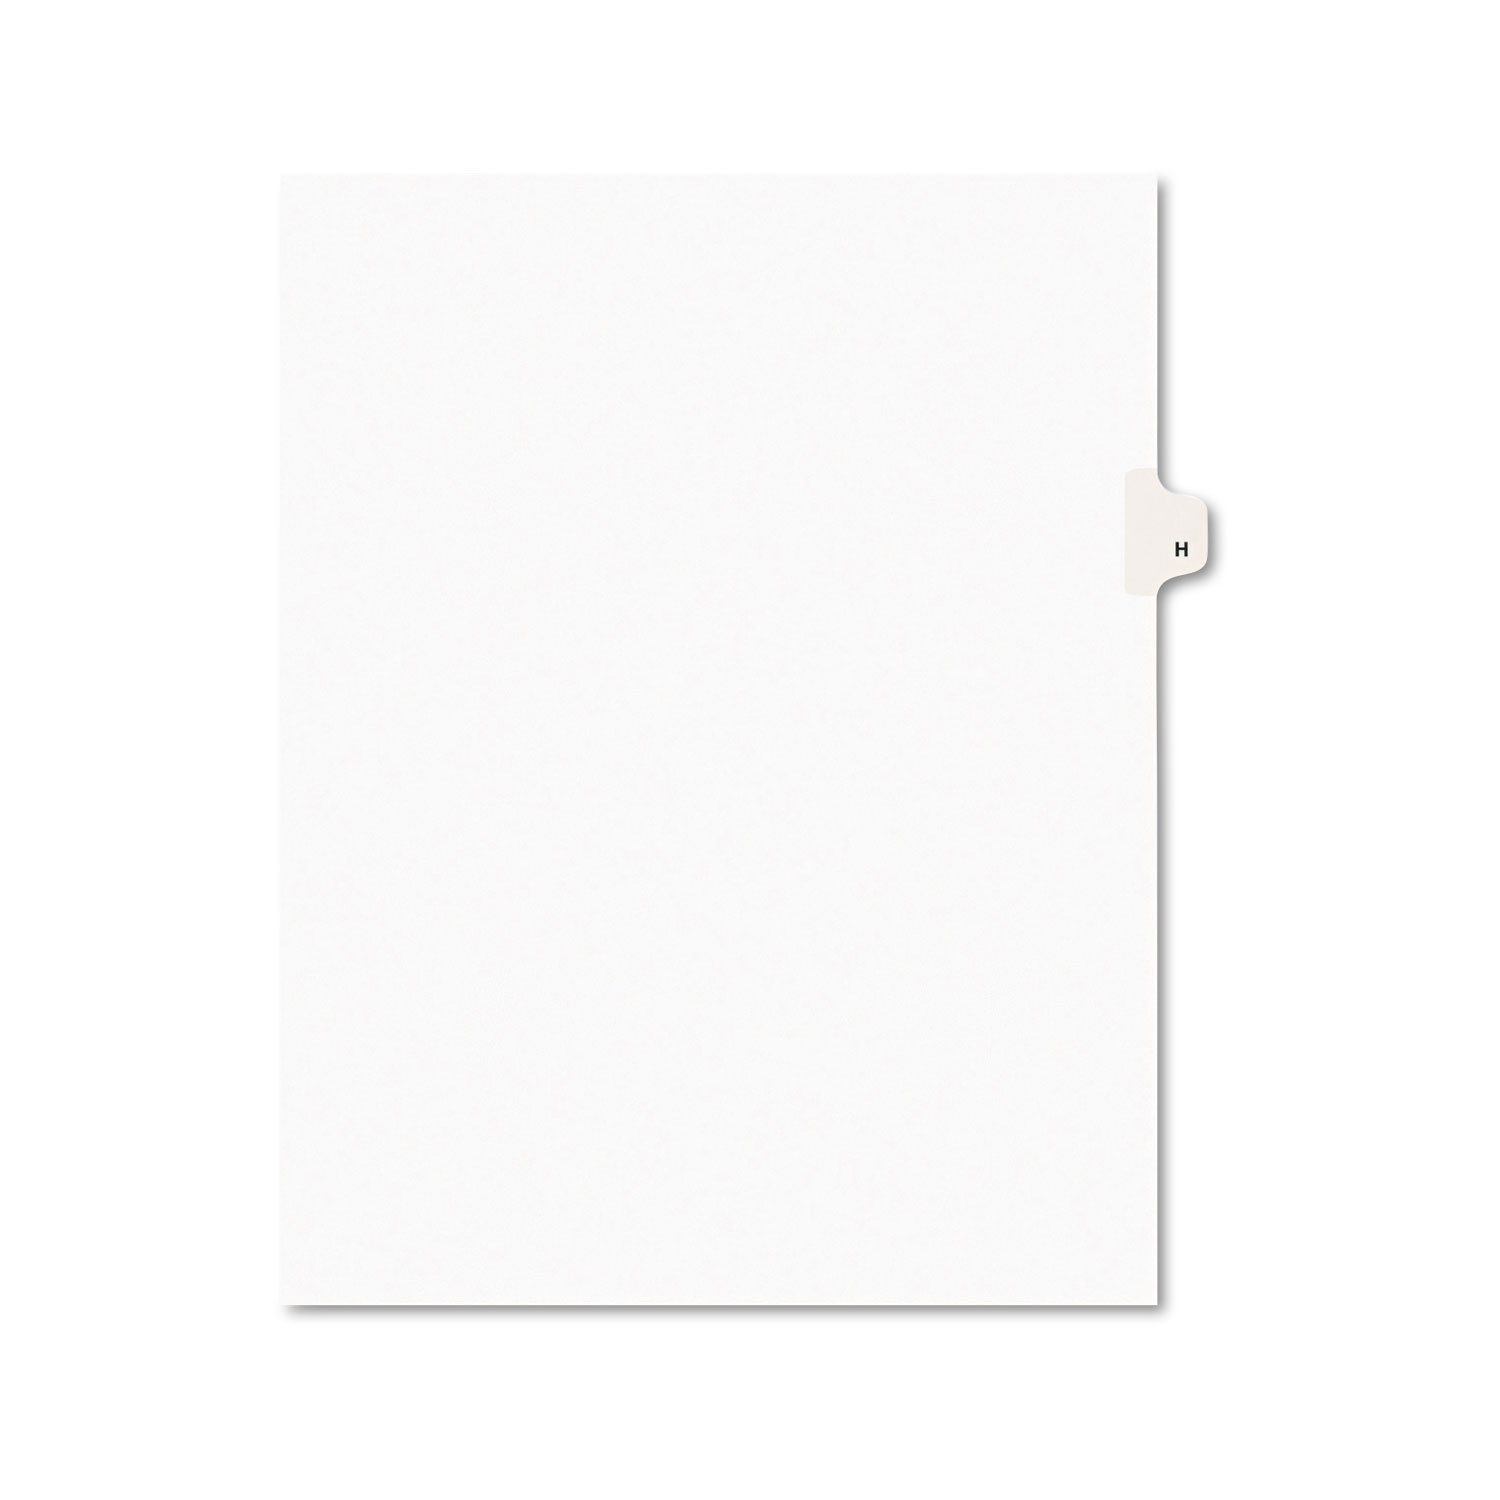  Avery 01408 Preprinted Legal Exhibit Side Tab Index Dividers, Avery Style, 26-Tab, H, 11 x 8.5, White, 25/Pack (AVE01408) 